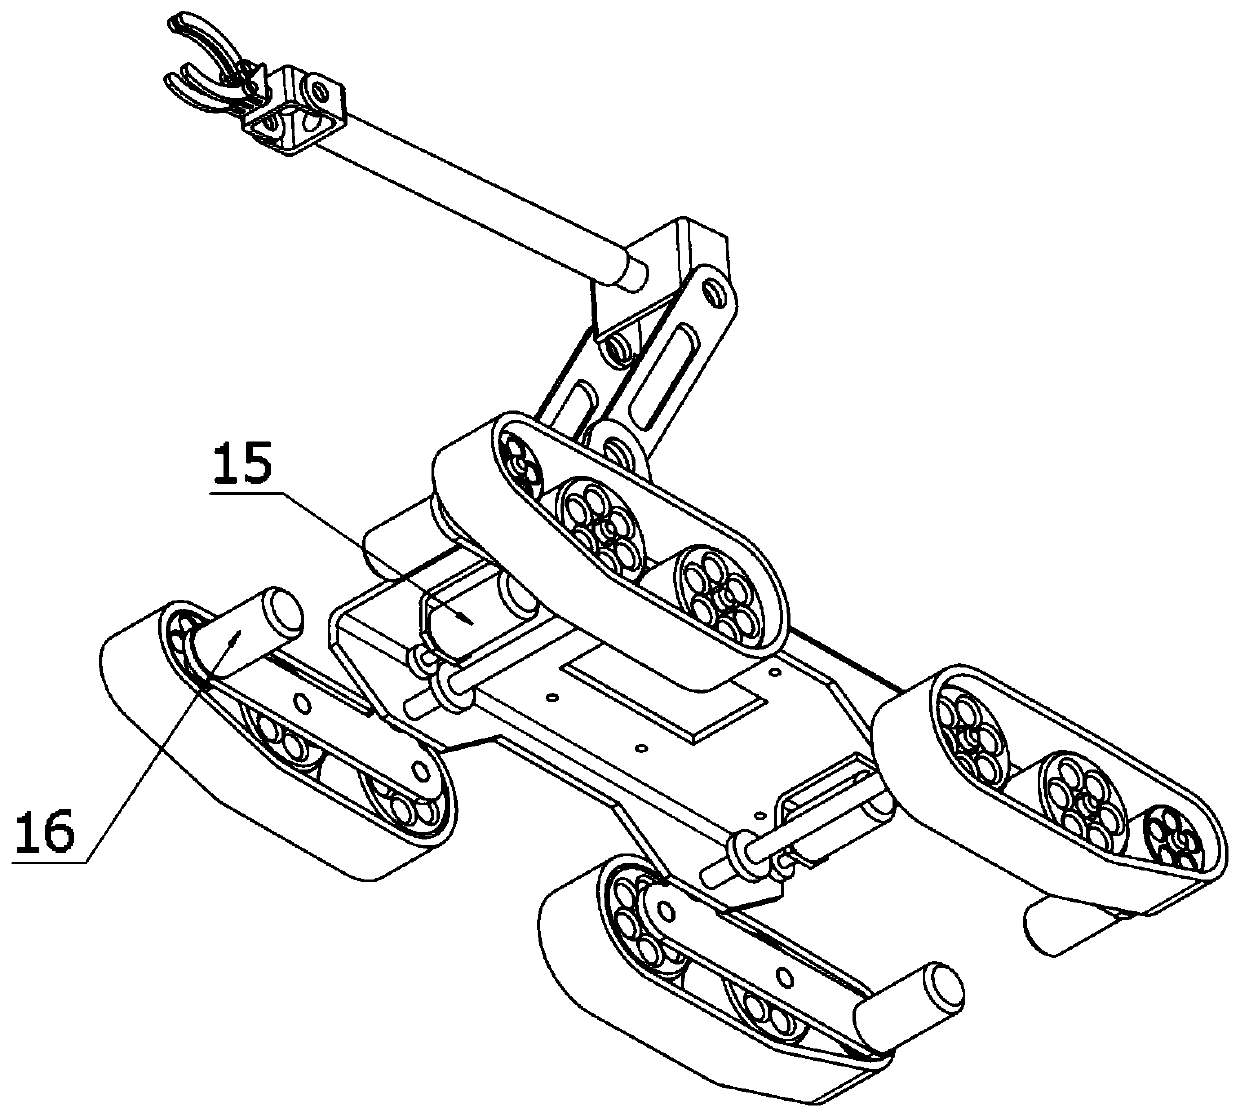 Control system for tracked robot with stair climbing function and method